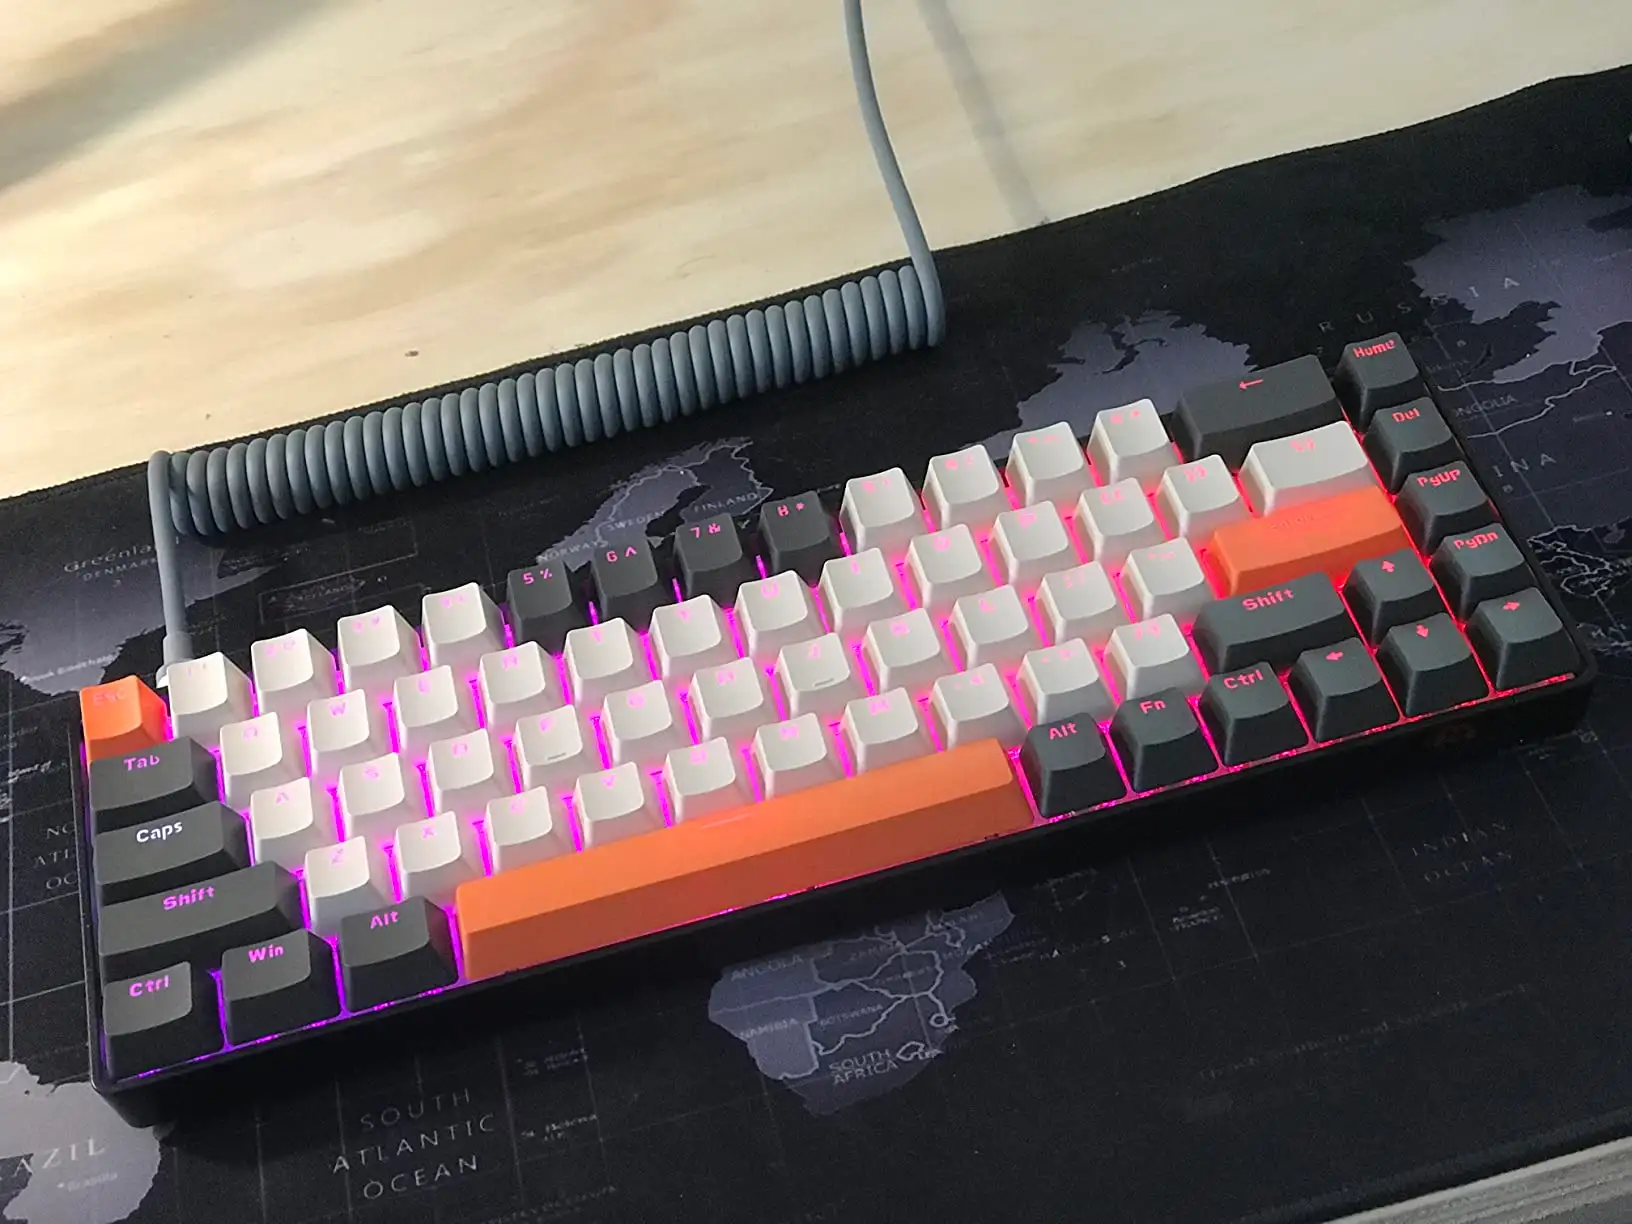 The compact layout of the keyboard allows for more space on your desk, giving you room for other peripherals or simply providing a clutter-free workspace.